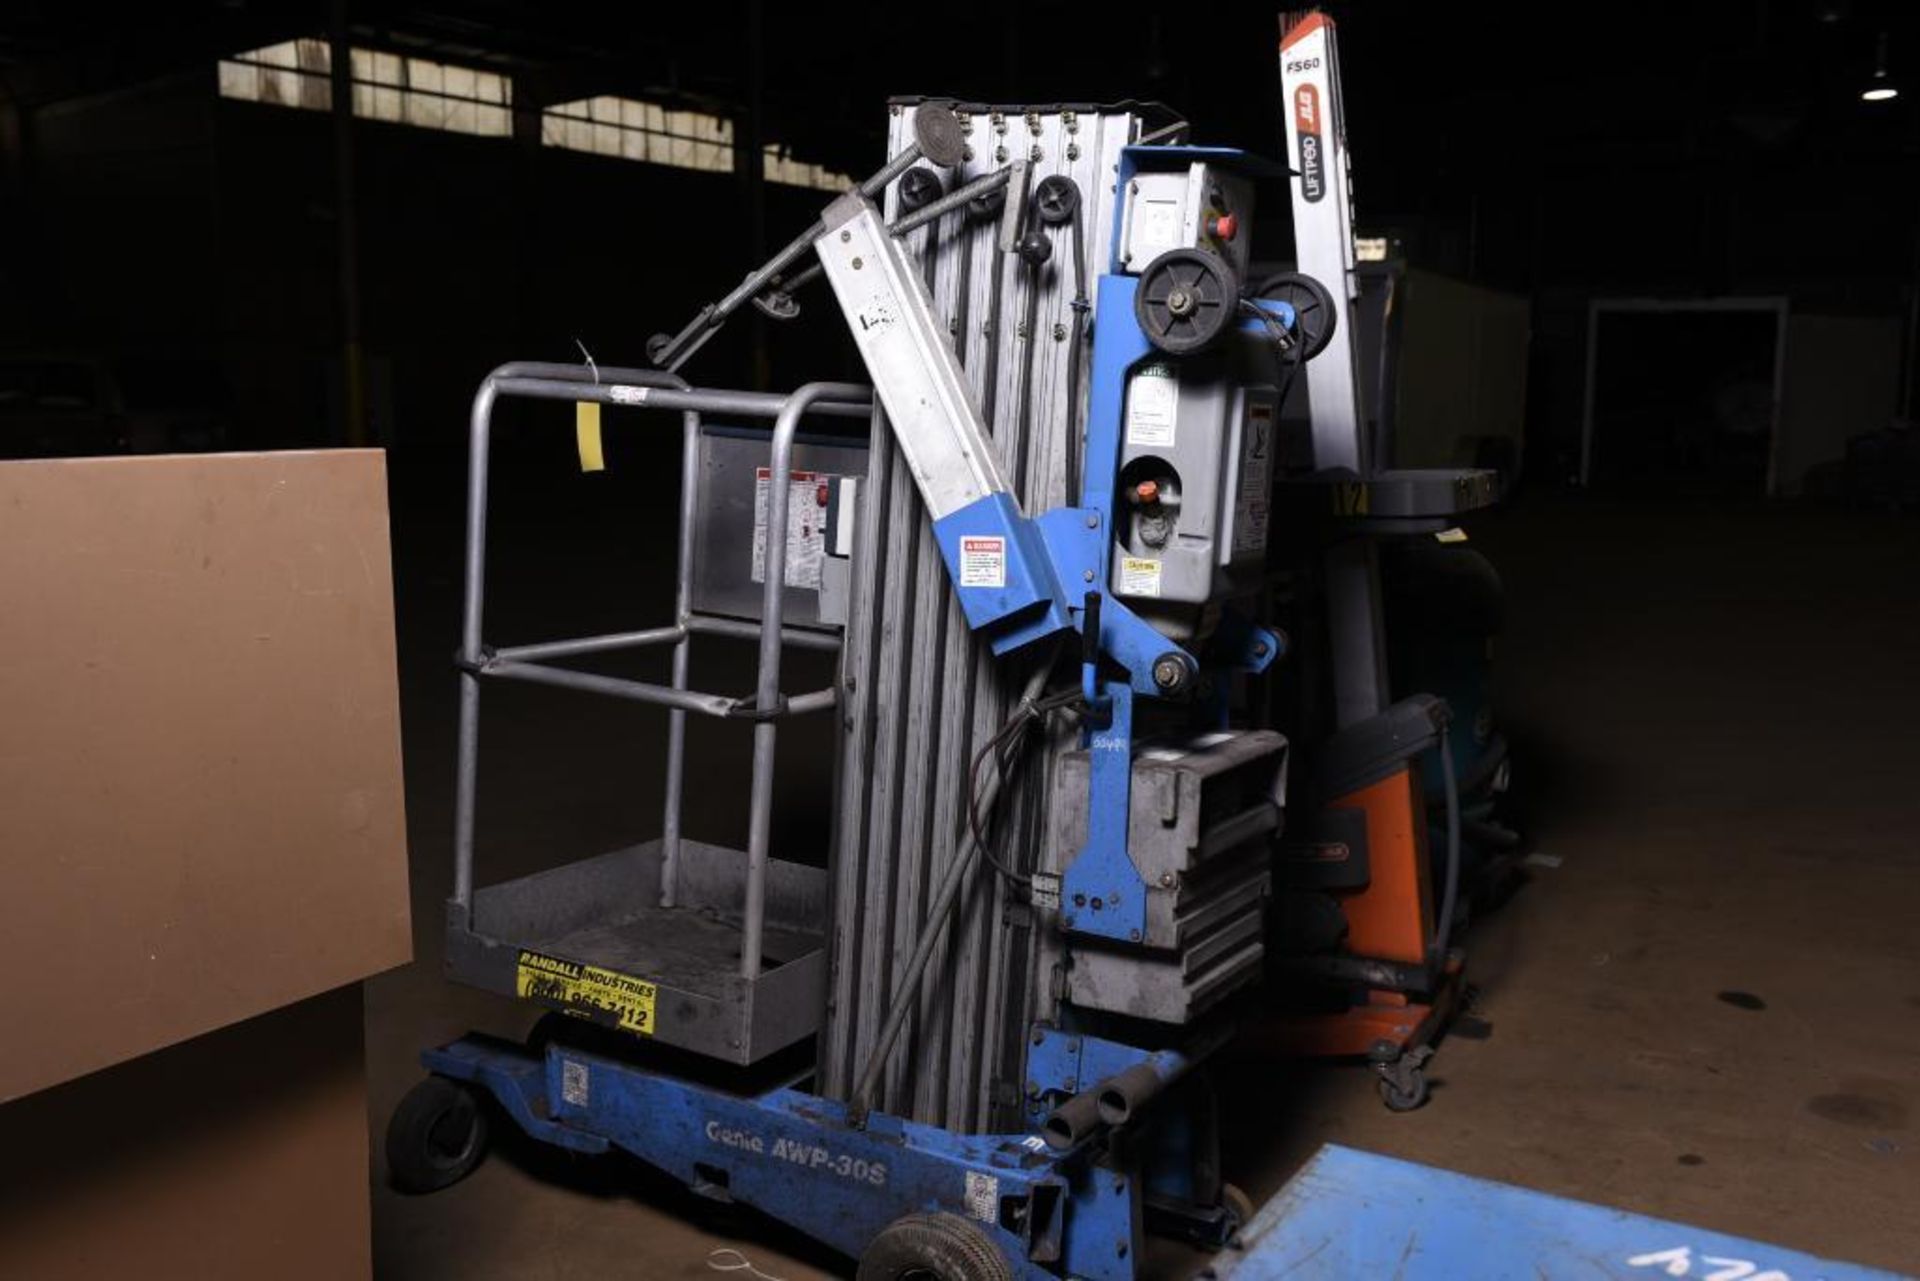 Genie AWP-30S Electric Potable Man Lift, Max. Height: 30' - Image 3 of 3